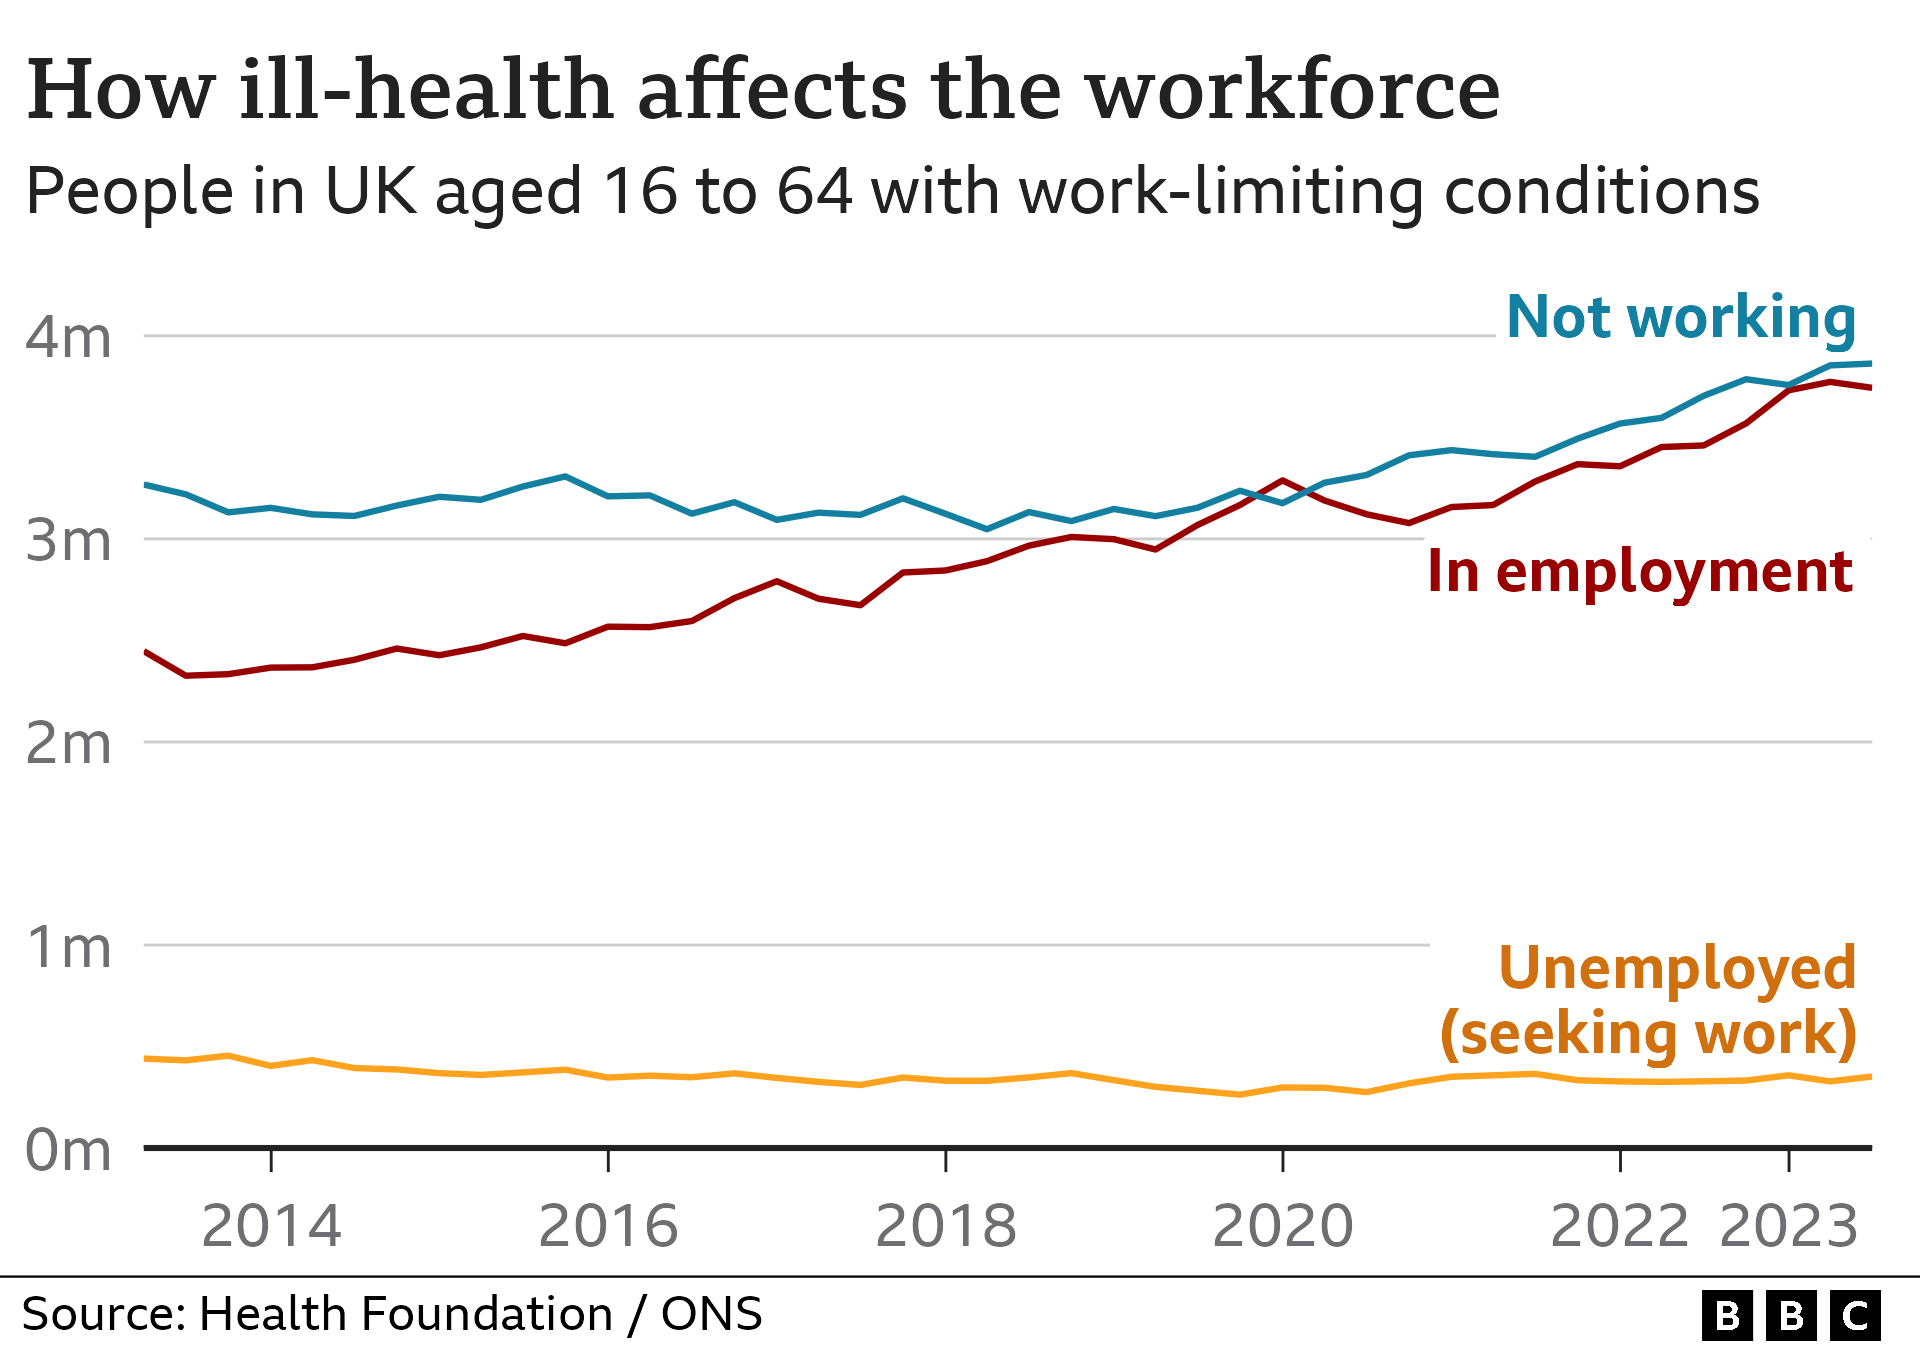 Line chart showing the number of people in the UK aged 16 to 64 with work-limiting conditions. The number in employment rises from 2.5 million in 2013 to 3.7 million in 2023, while those not working rises from 3.3 million to 3.9 million.